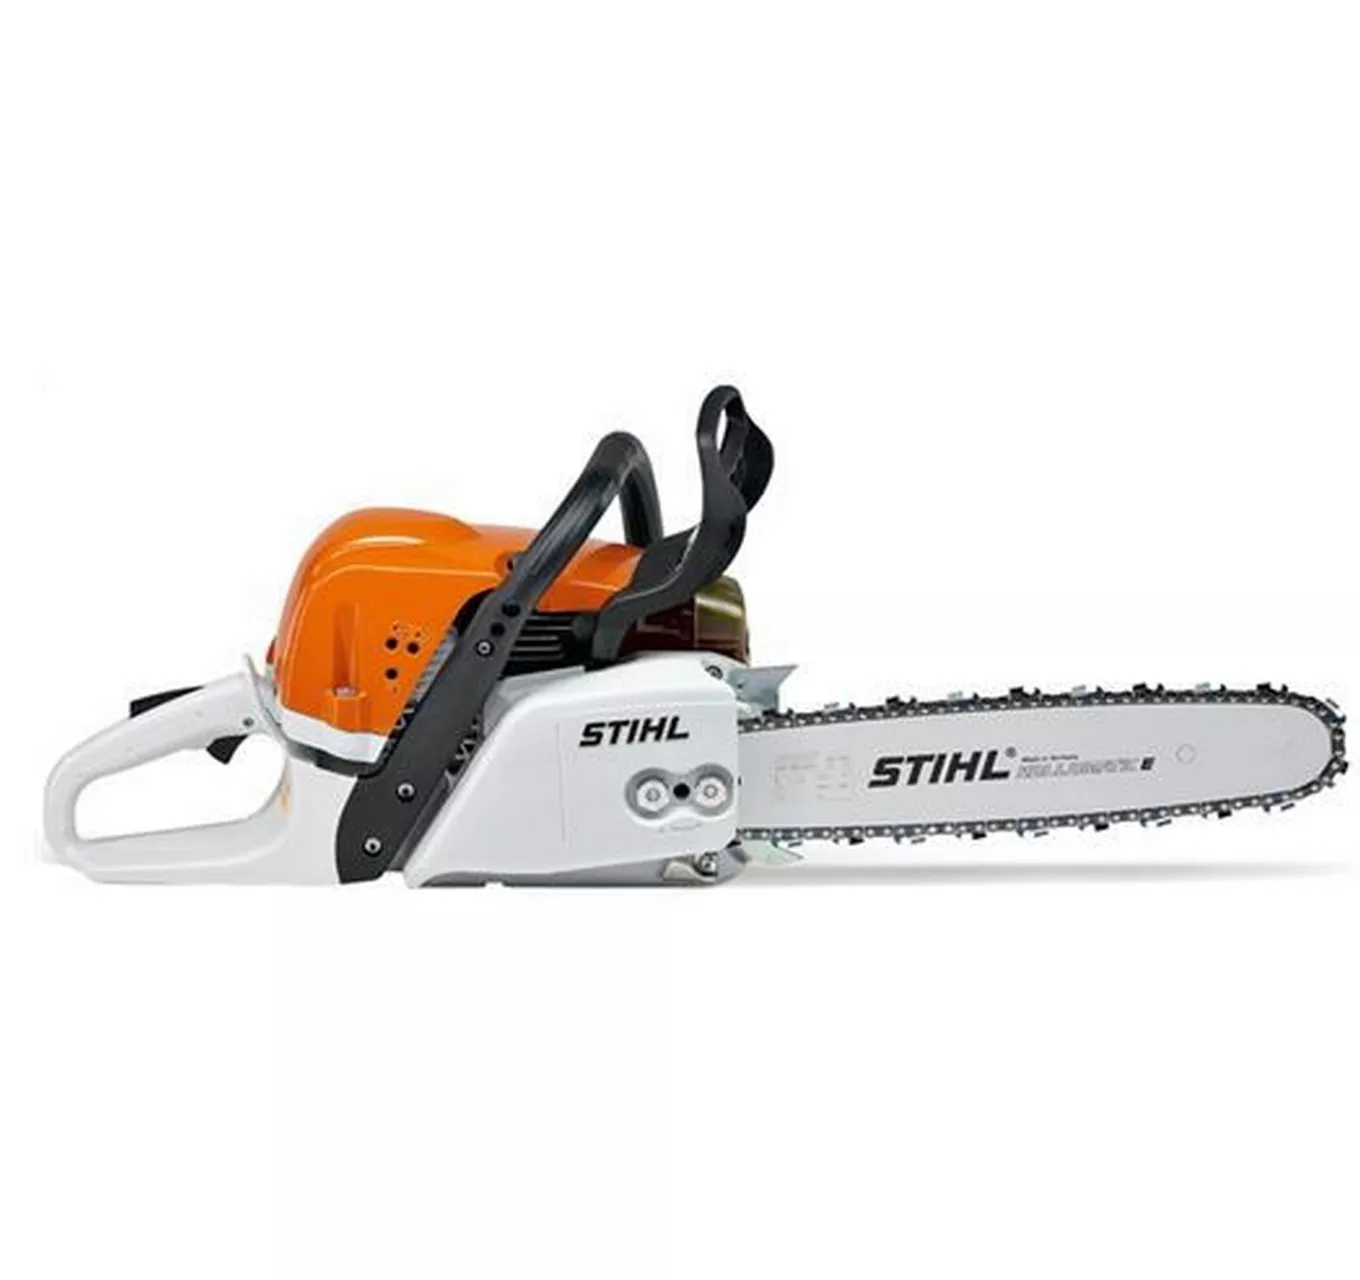 MS 391 Chainsaw 16"